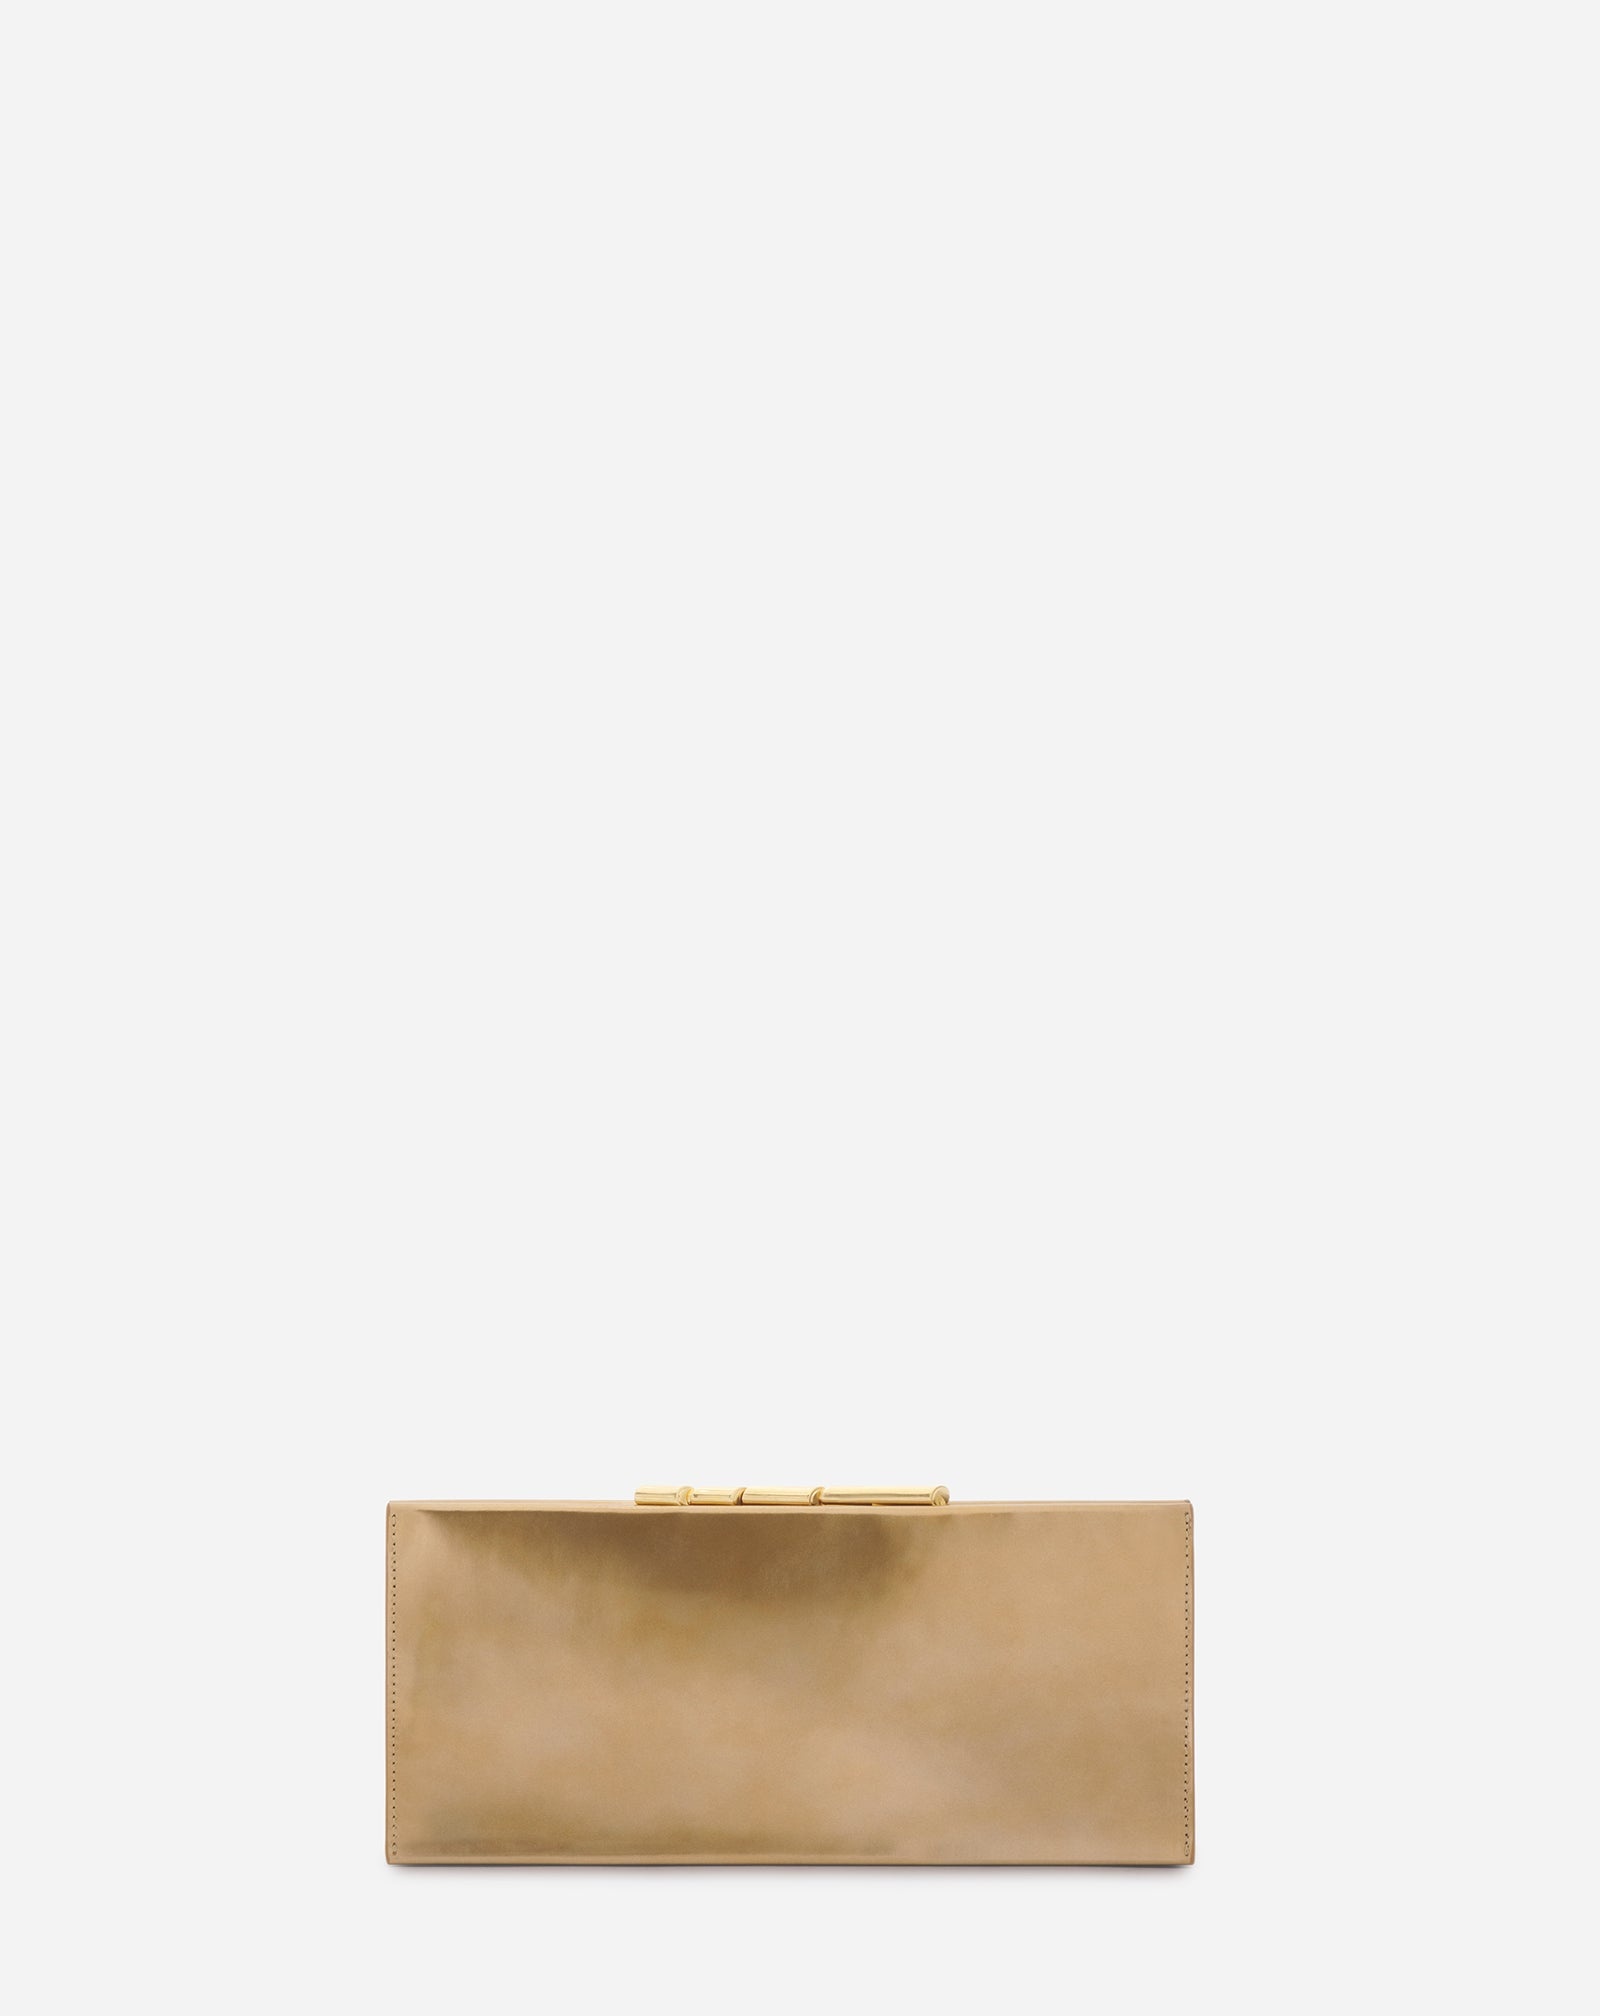 SEQUENCE BY LANVIN METALLIC LEATHER CLUTCH BAG - 1